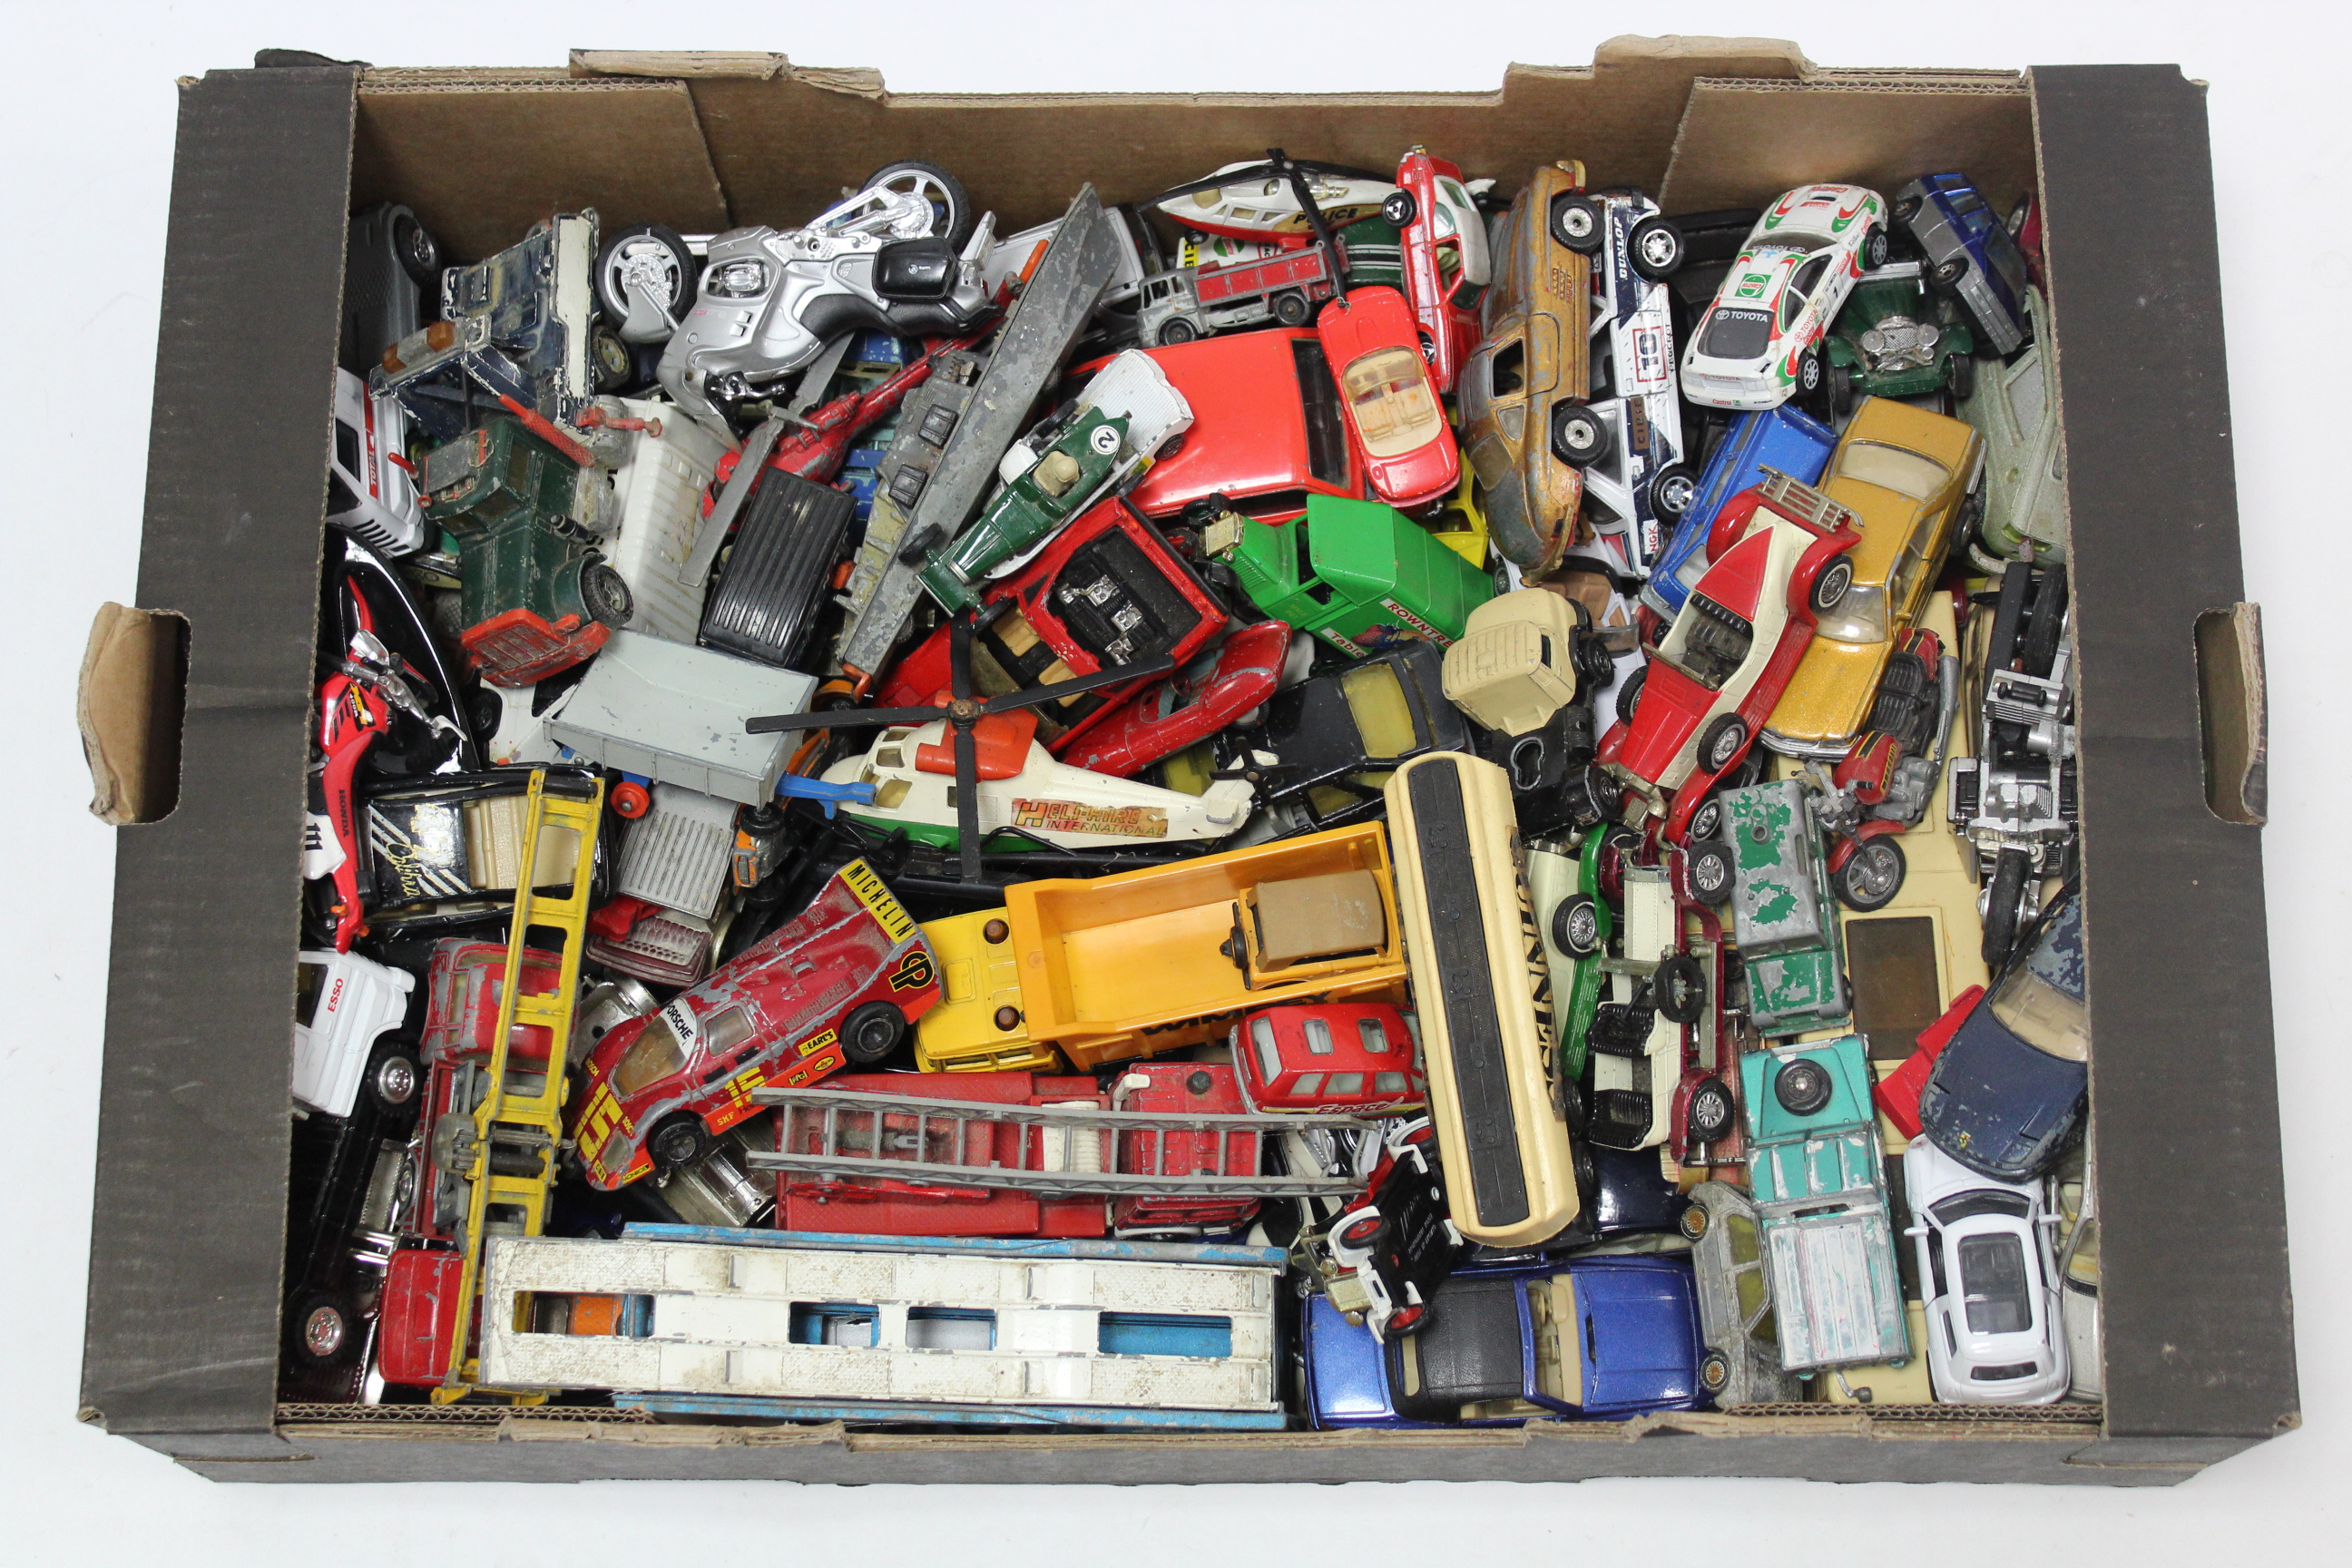 Approximately eighty various scale models by Dinky, Corgi, Matchbox, Superkings, etc., all